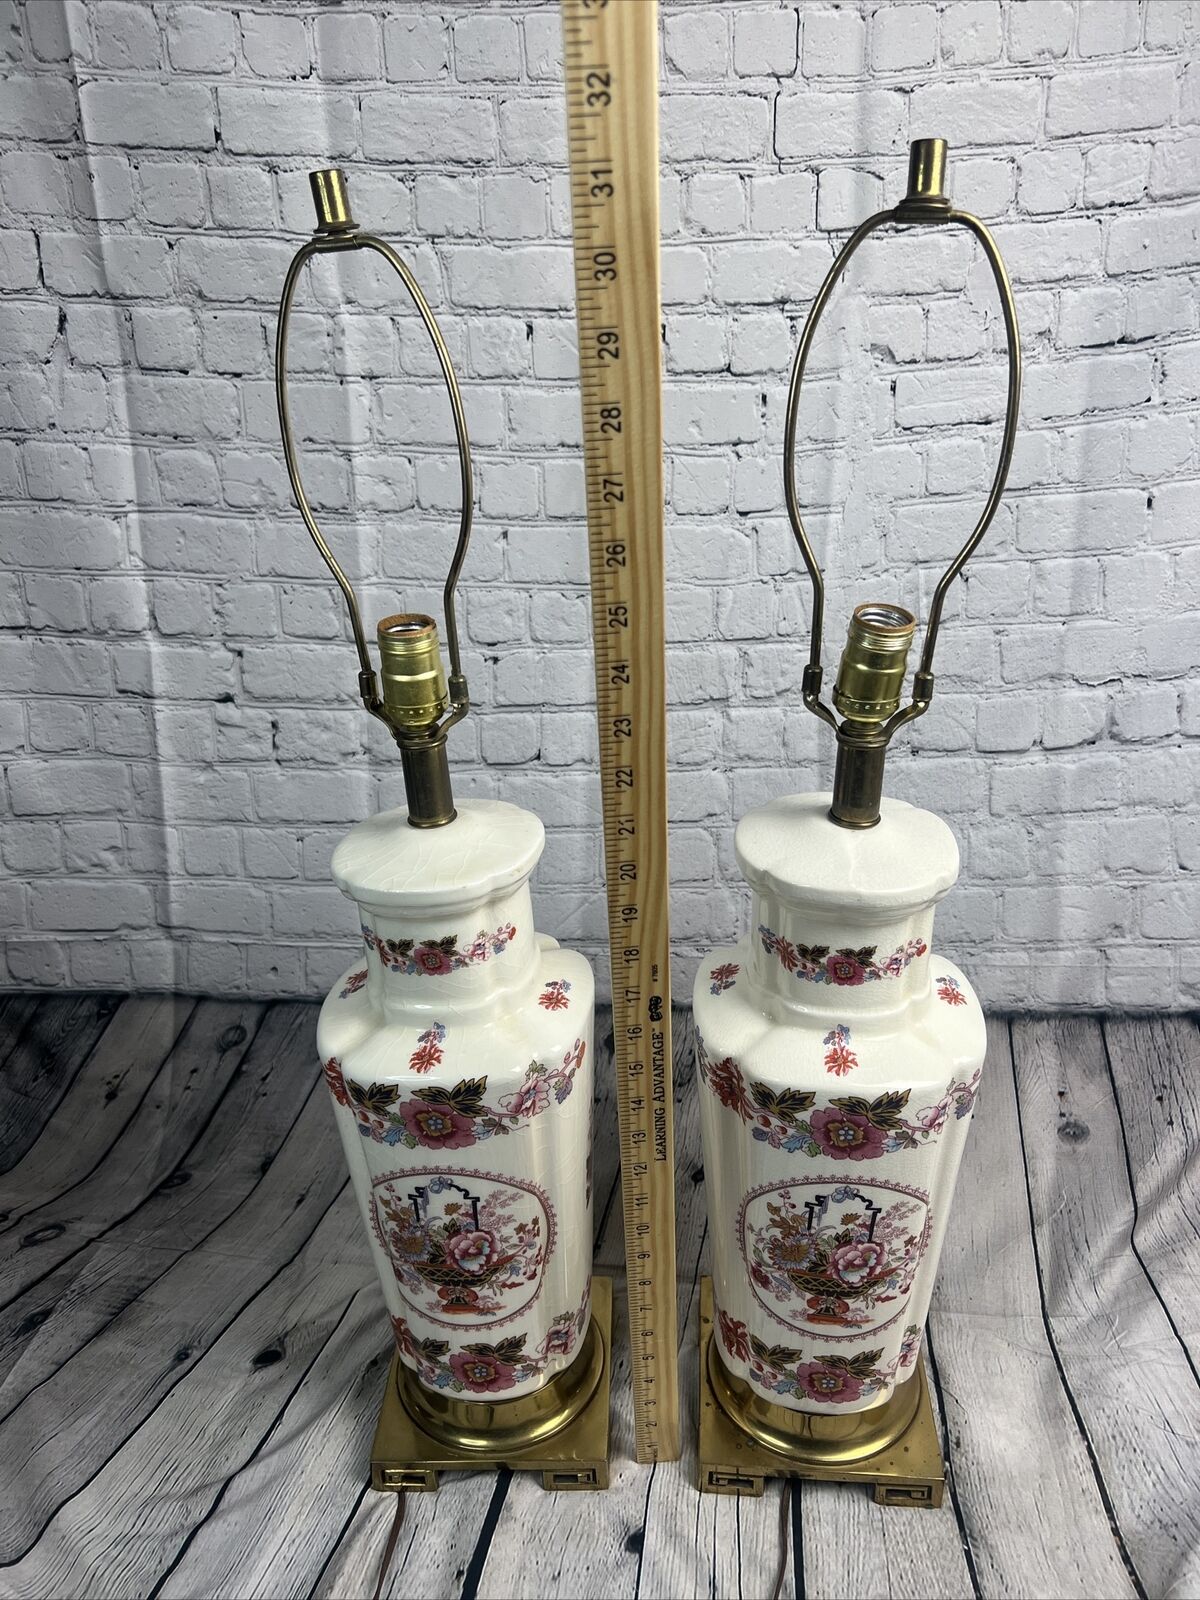 1940s French Chinoiserie Porcelain Lamps Both WorkStunning 🤩Heavy Bronze Base